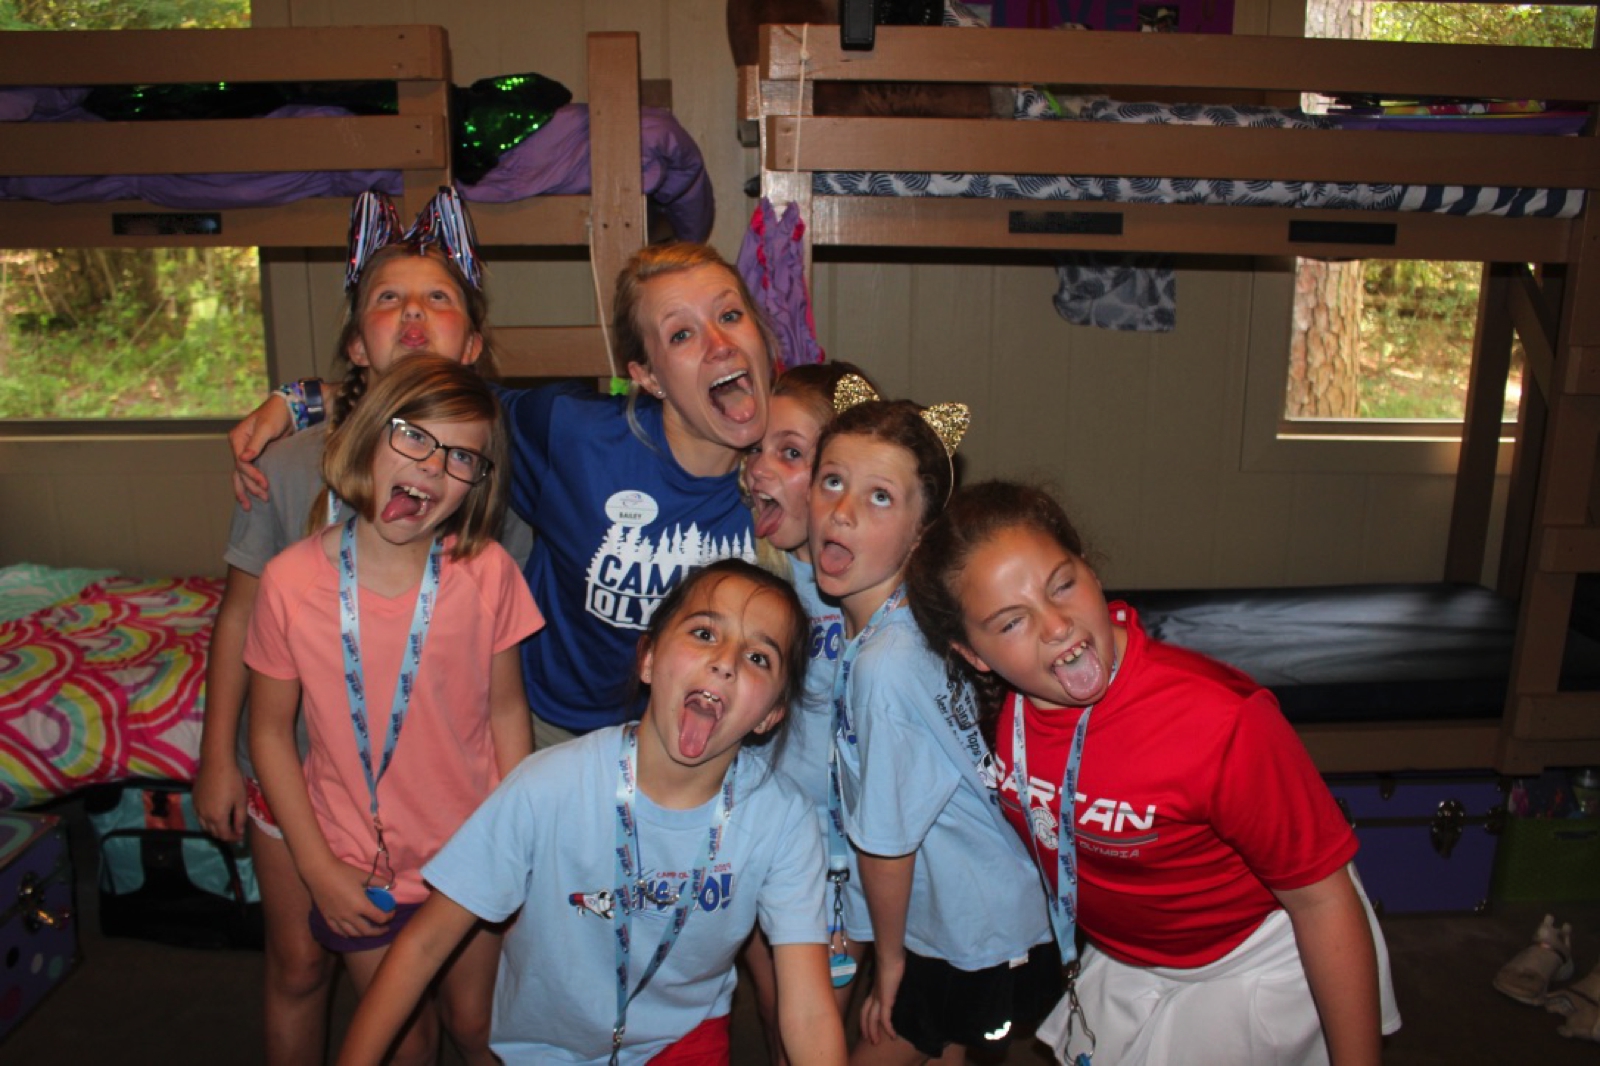 What To Look for When Choosing a Summer Camp